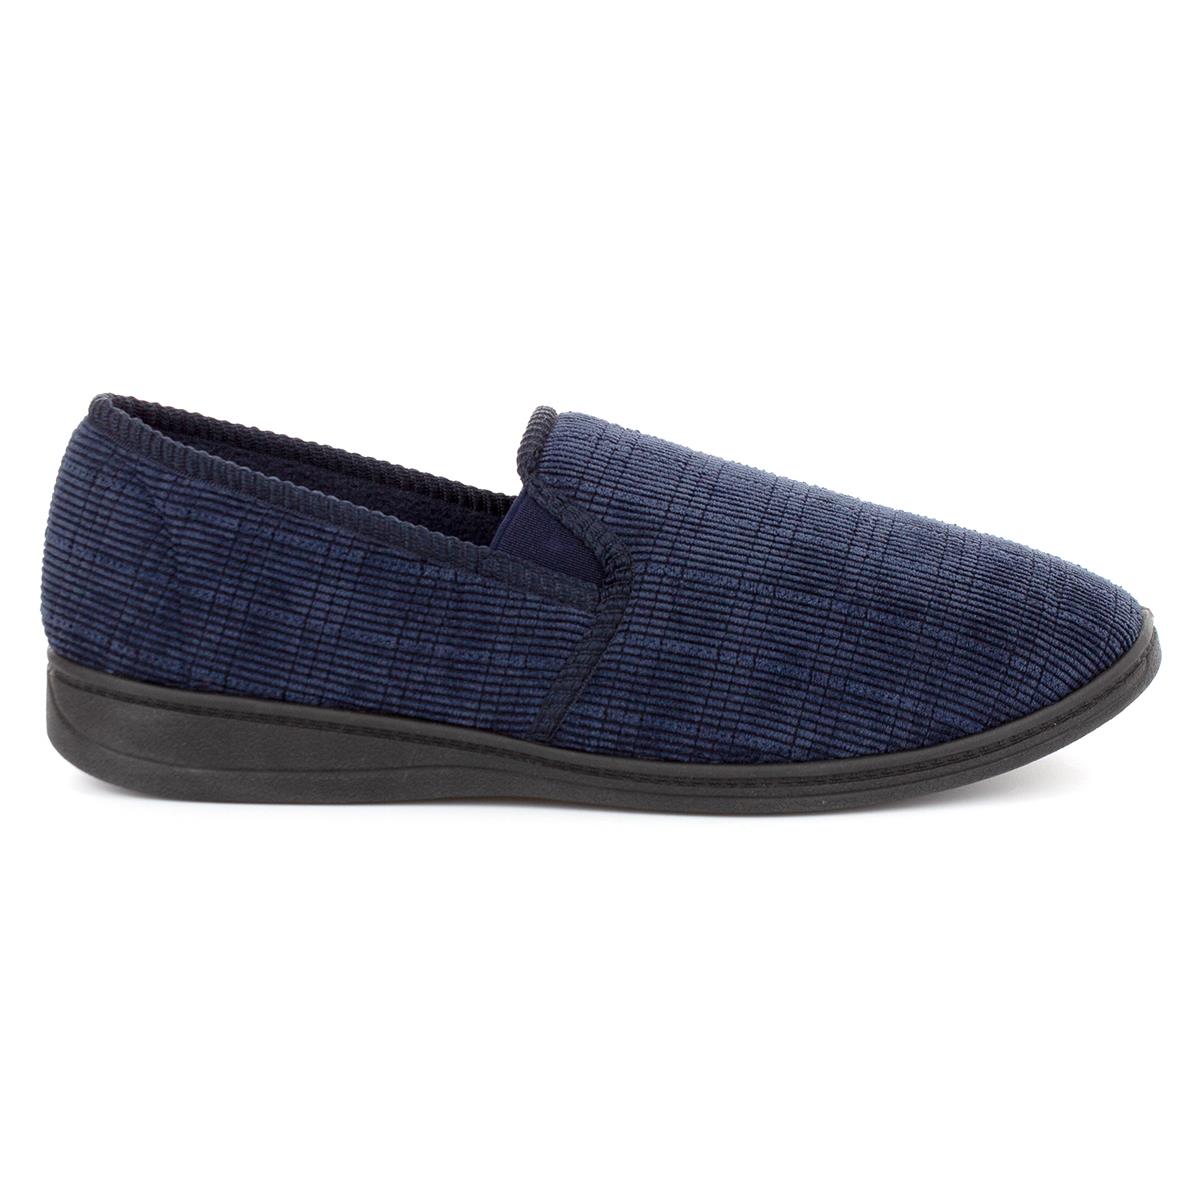 shoe zone slippers mens